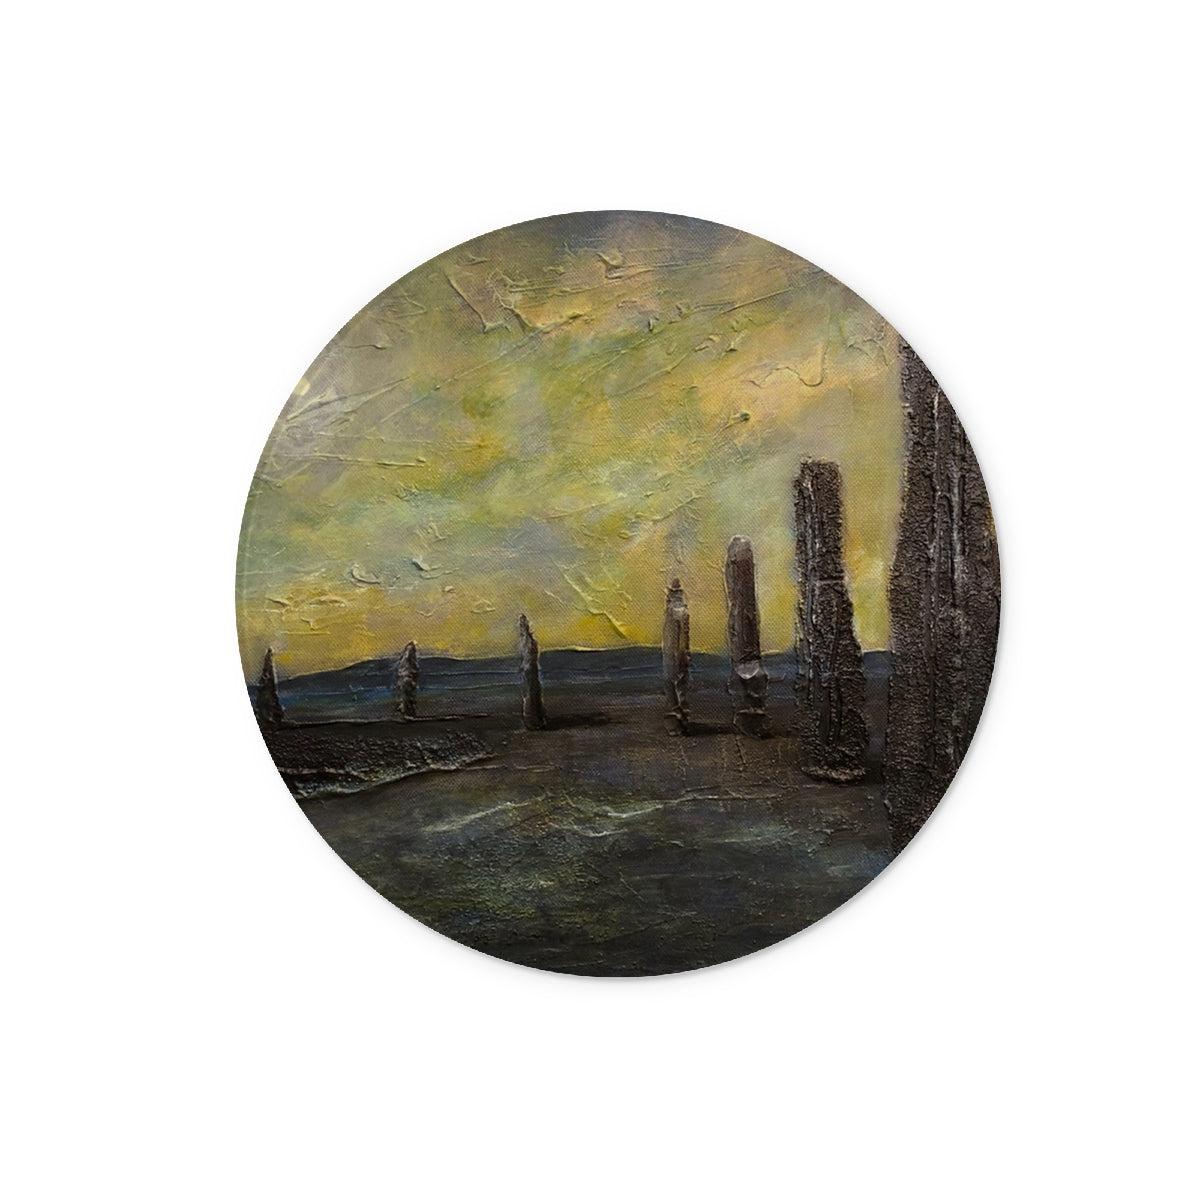 An Ethereal Ring Of Brodgar Art Gifts Glass Chopping Board-Glass Chopping Boards-Orkney Art Gallery-12" Round-Paintings, Prints, Homeware, Art Gifts From Scotland By Scottish Artist Kevin Hunter